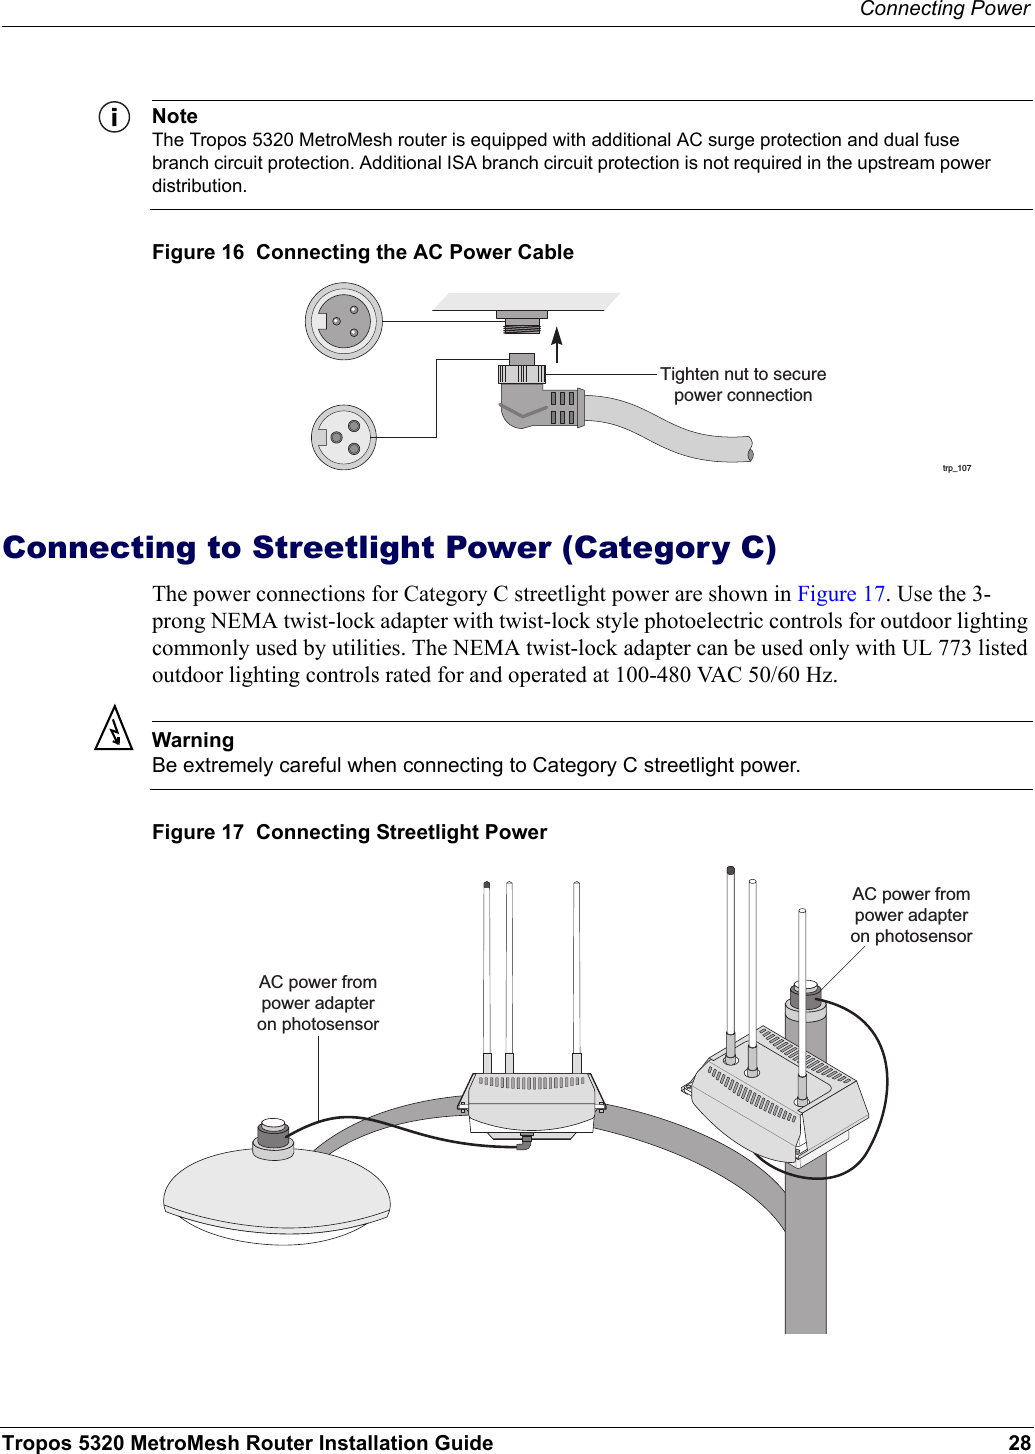 Connecting PowerTropos 5320 MetroMesh Router Installation Guide 28NoteThe Tropos 5320 MetroMesh router is equipped with additional AC surge protection and dual fuse branch circuit protection. Additional ISA branch circuit protection is not required in the upstream power distribution.Figure 16  Connecting the AC Power CableConnecting to Streetlight Power (Category C)The power connections for Category C streetlight power are shown in Figure 17. Use the 3-prong NEMA twist-lock adapter with twist-lock style photoelectric controls for outdoor lighting commonly used by utilities. The NEMA twist-lock adapter can be used only with UL 773 listed outdoor lighting controls rated for and operated at 100-480 VAC 50/60 Hz.WarningBe extremely careful when connecting to Category C streetlight power. Figure 17  Connecting Streetlight Powertrp_107Tighten nut to securepower connectionAC power frompower adapteron photosensorAC power frompower adapteron photosensor